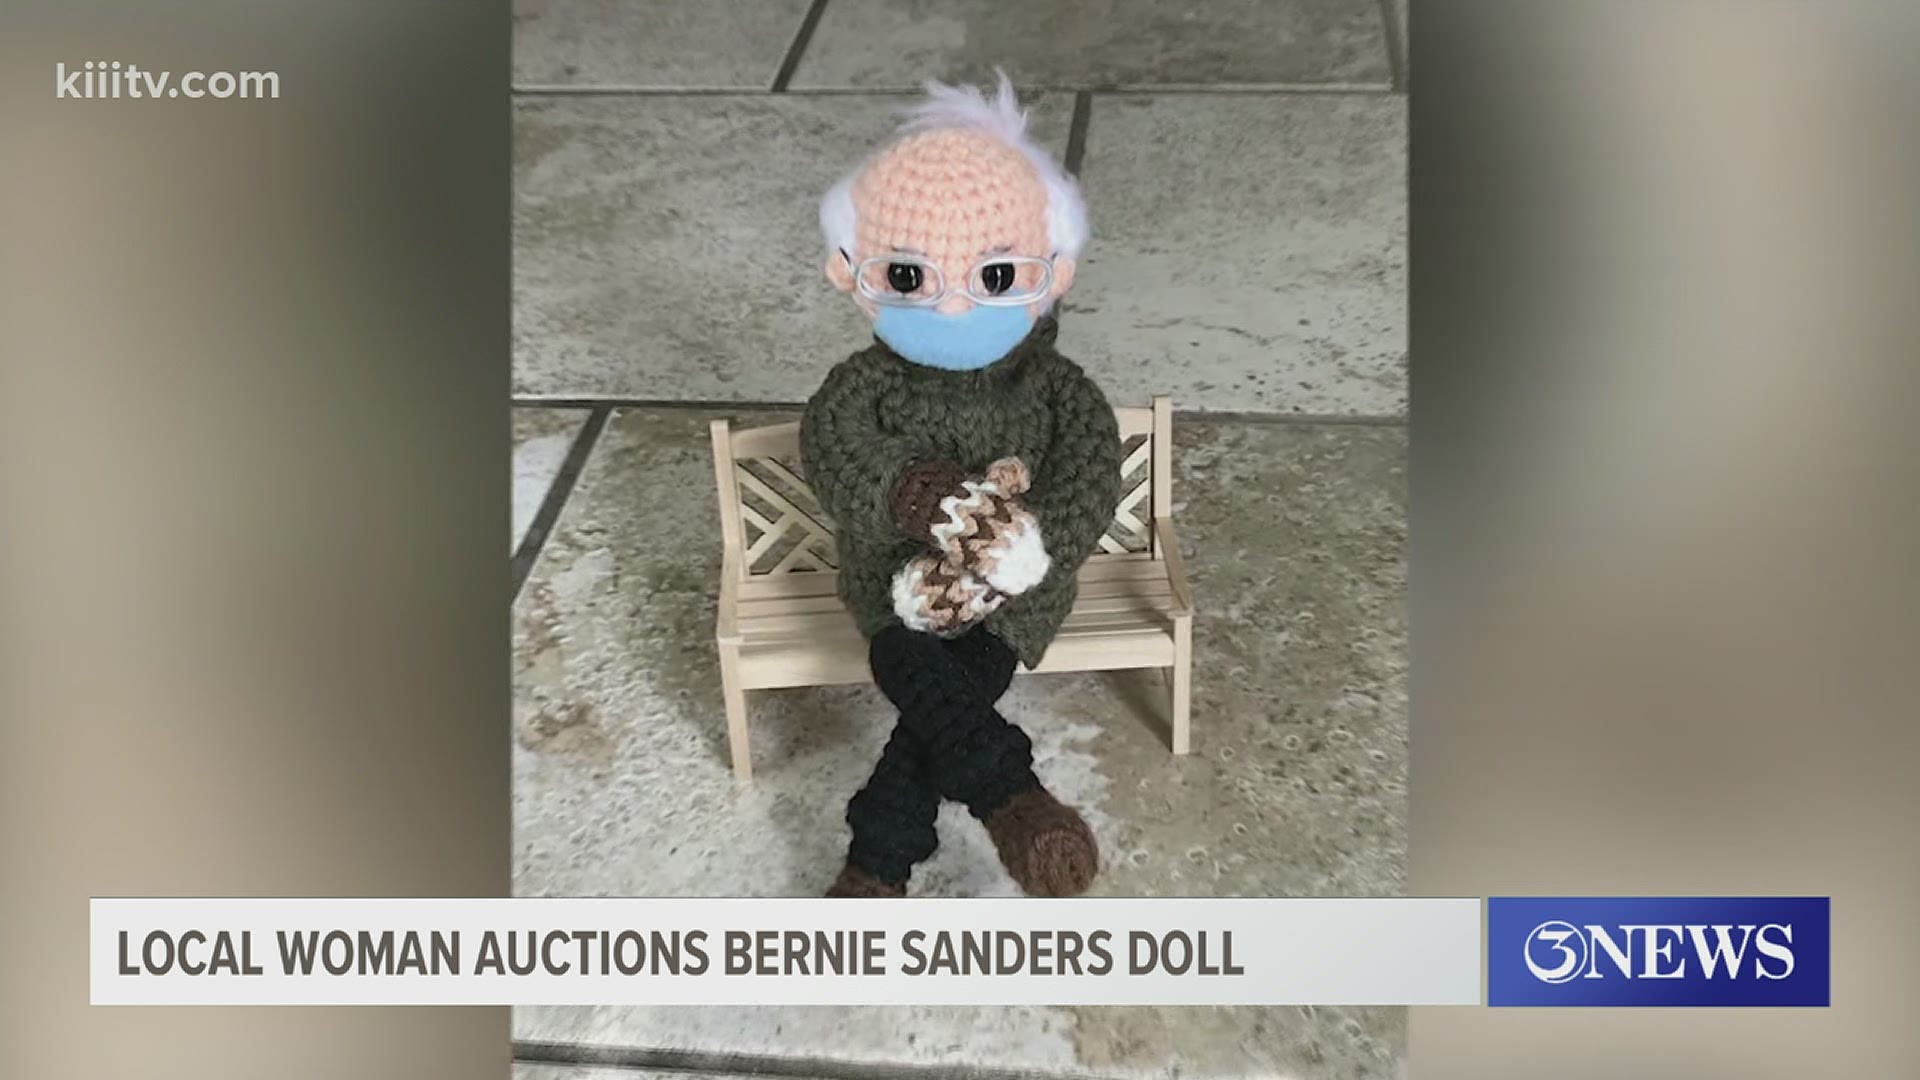 Tobey King, owner of 'Tobey Time Crochet' created a crochet doll of Vermont Senator Bernie Sanders and auctioned it off on eBay.